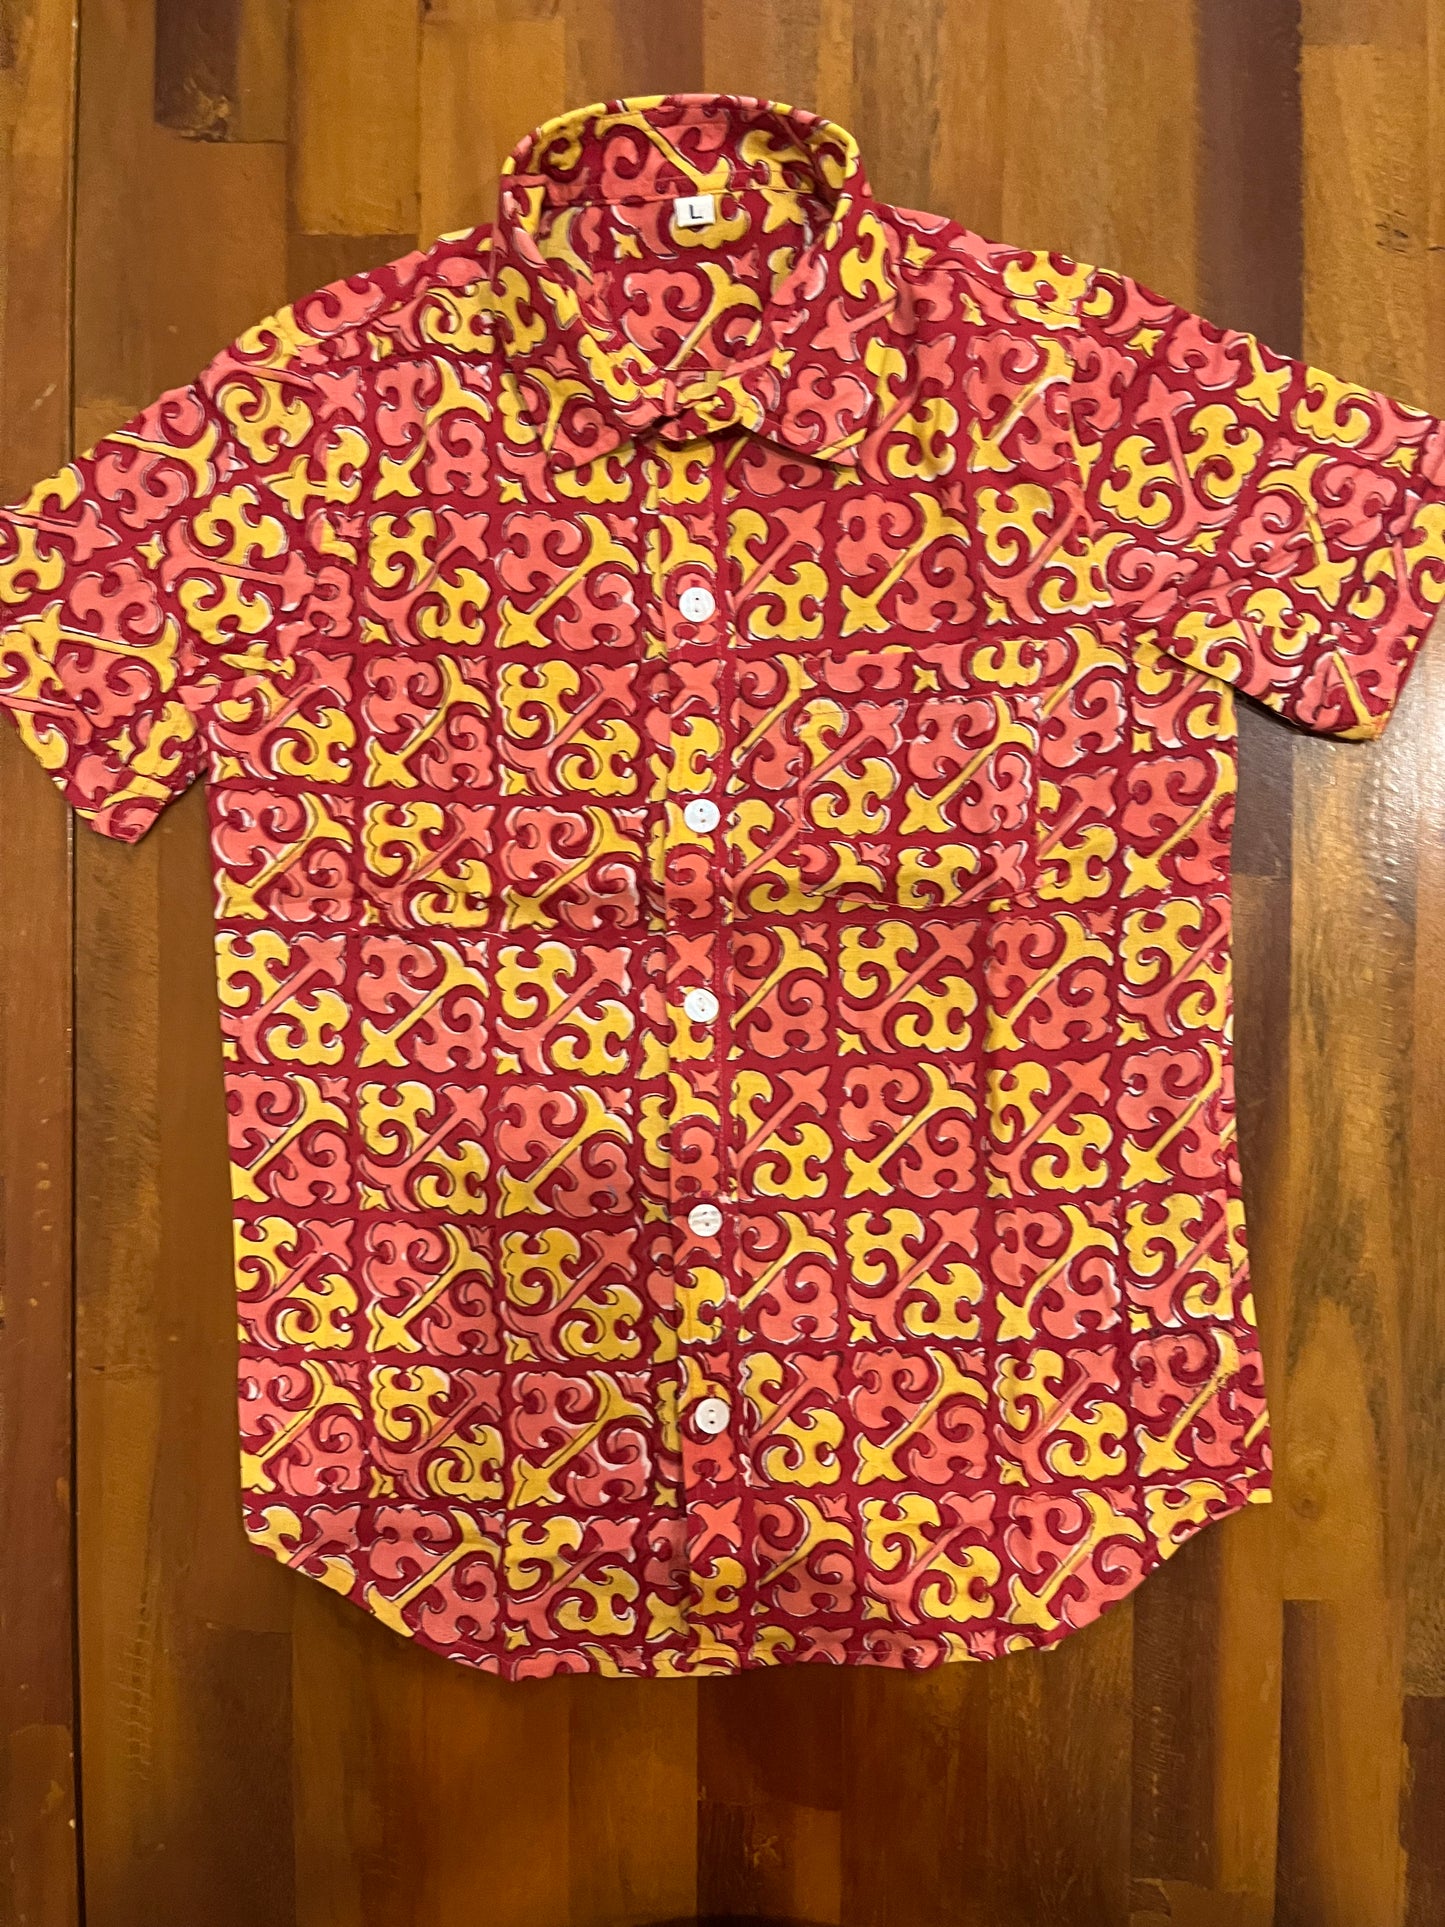 Southloom Jaipur Cotton Red and Yellow Hand Block Printed Shirt For Kids (Half Sleeves)